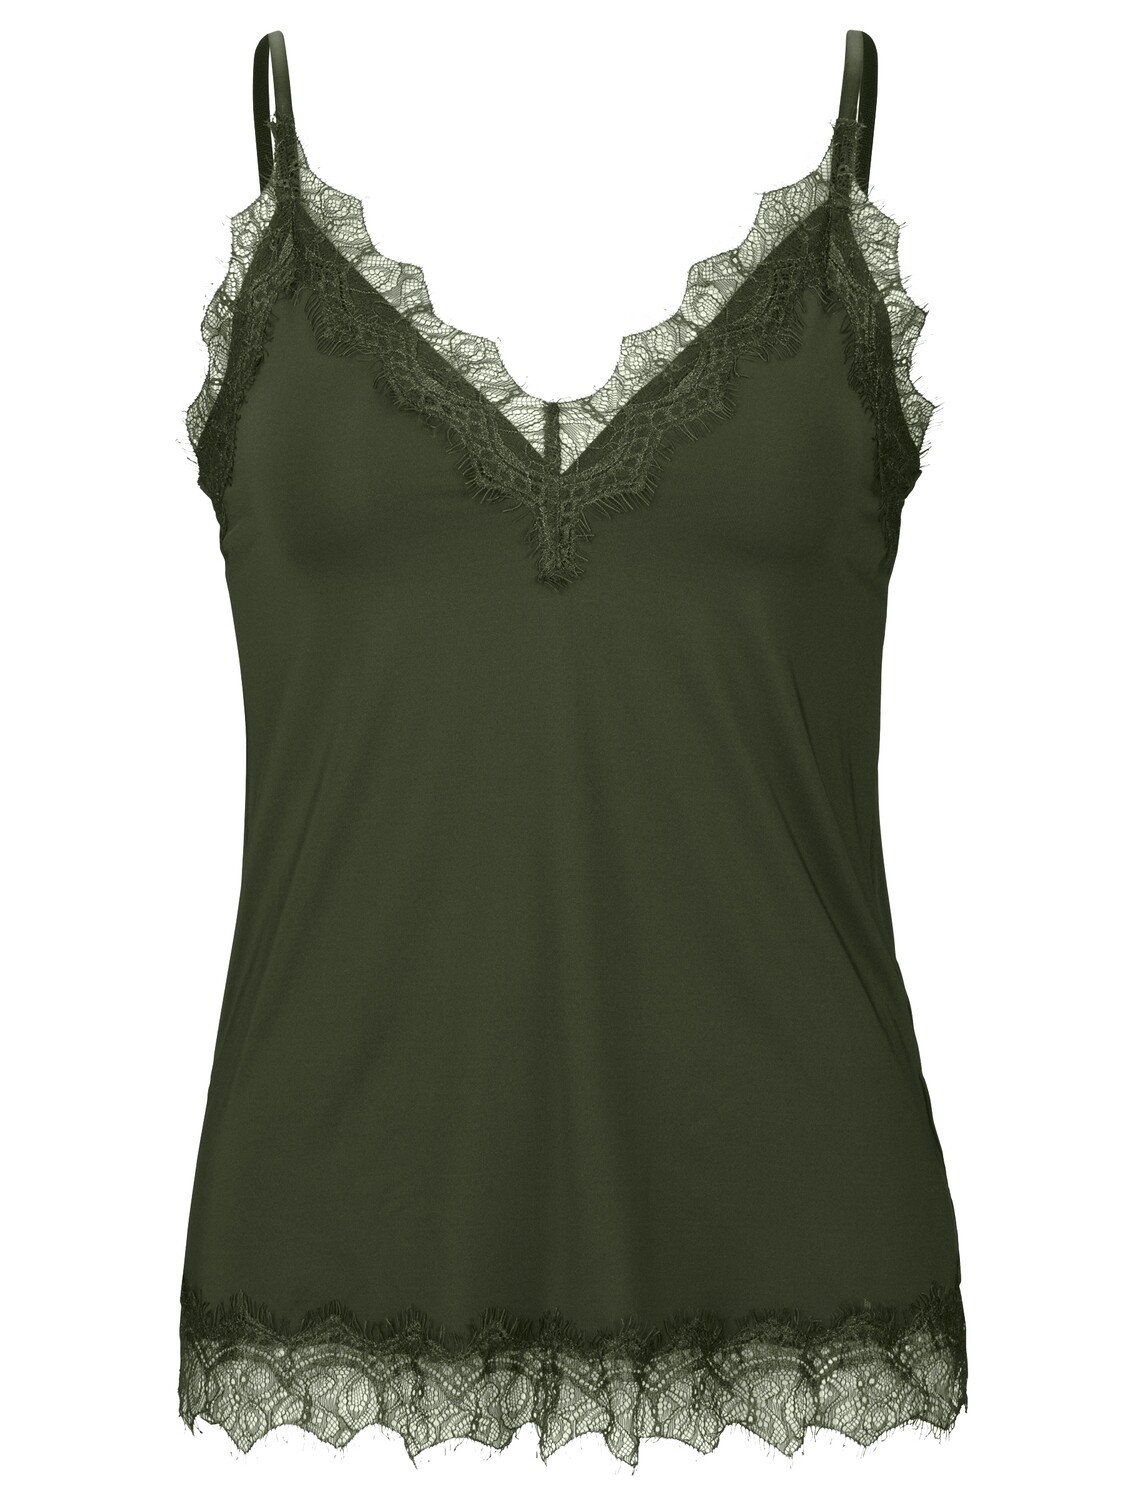 Strap Top 4217 Olive Night